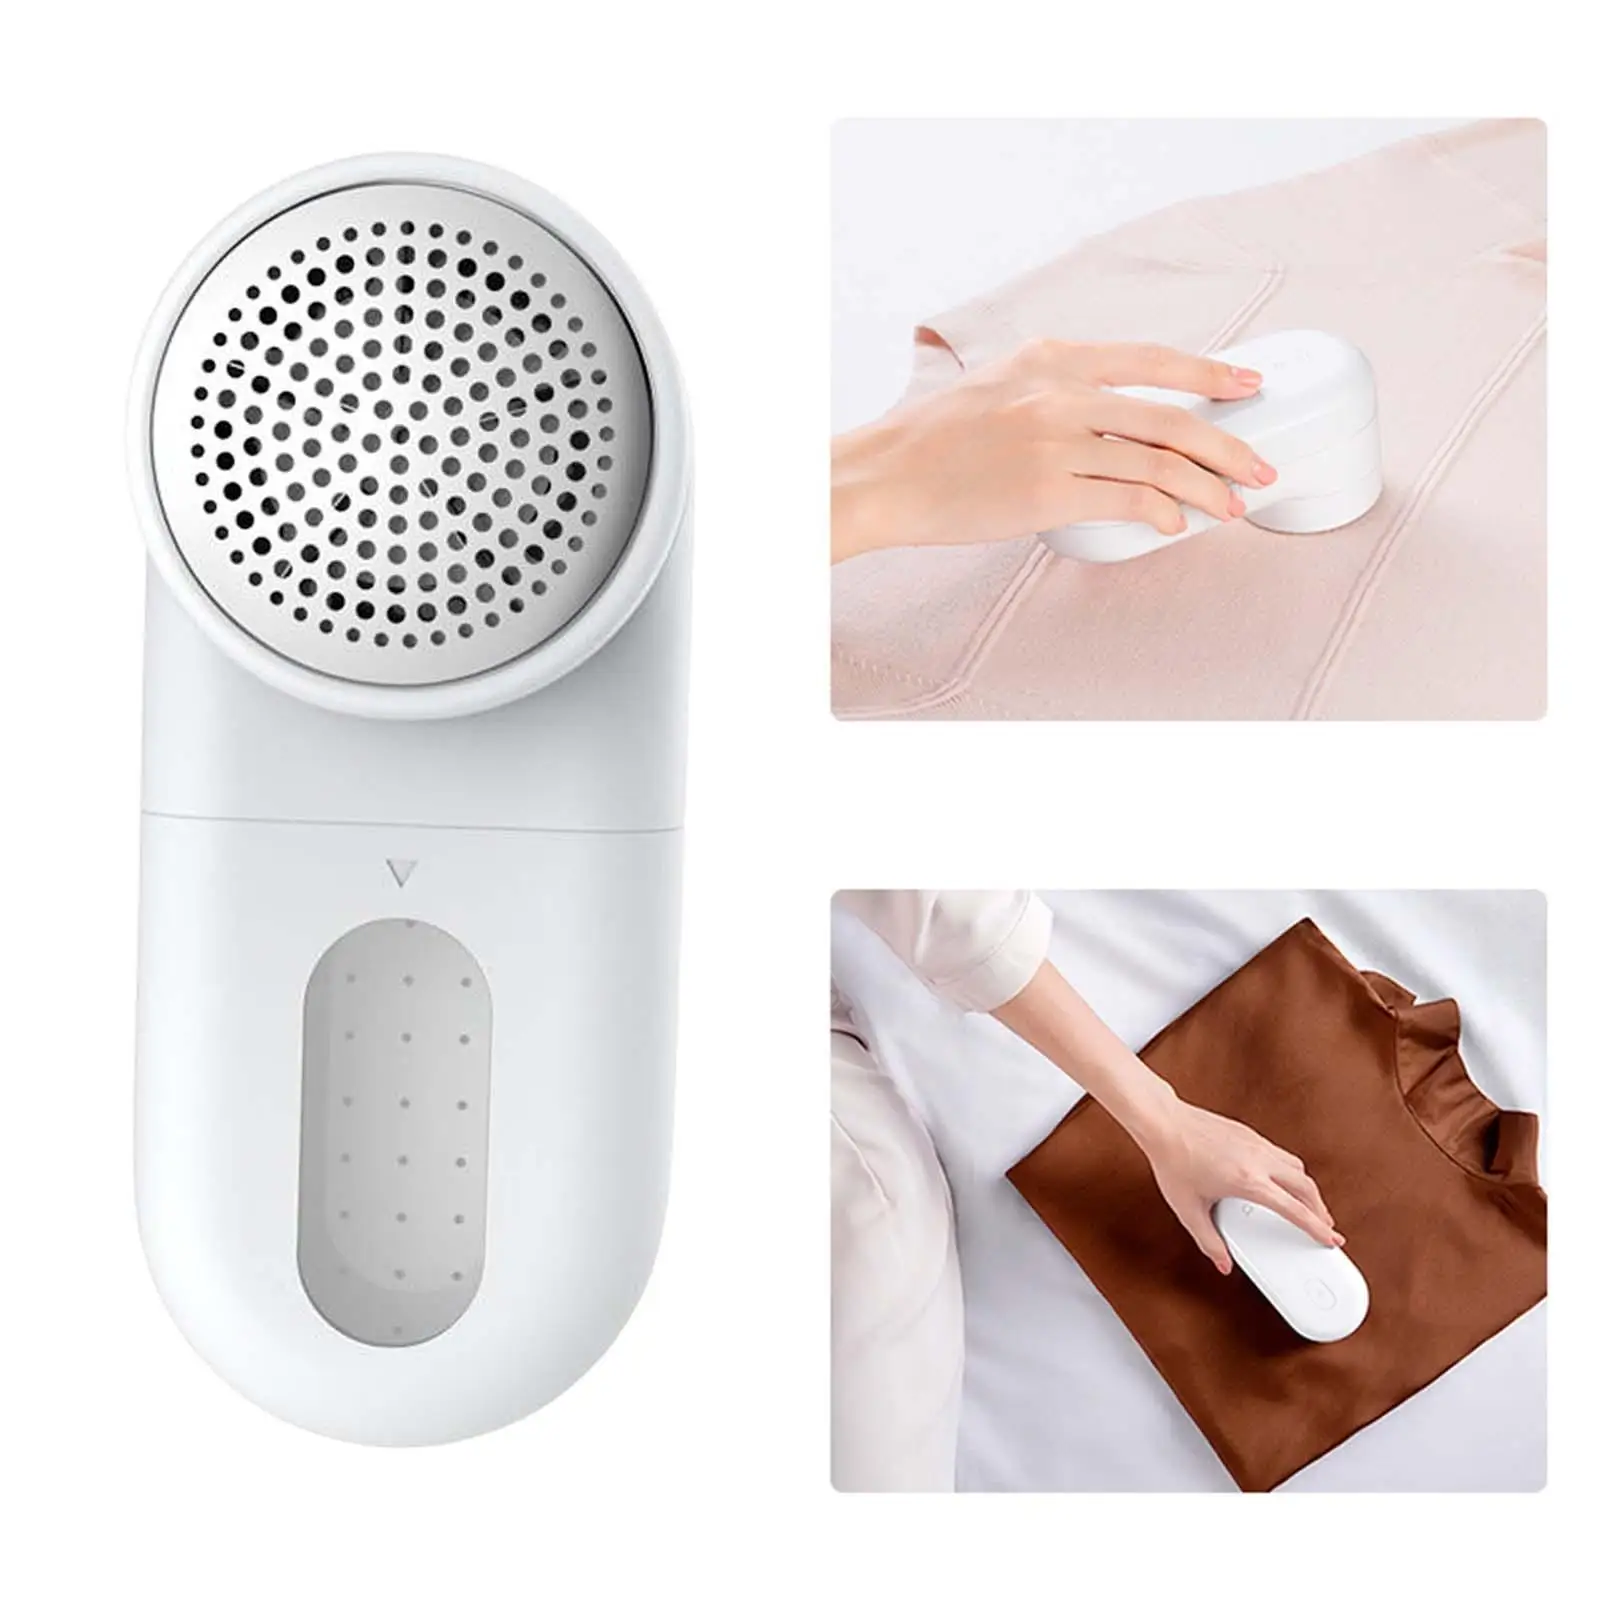 Lint Remover Electric Clothes Sweater Fabric Shaver Blanket Fuzz Remover Clothes